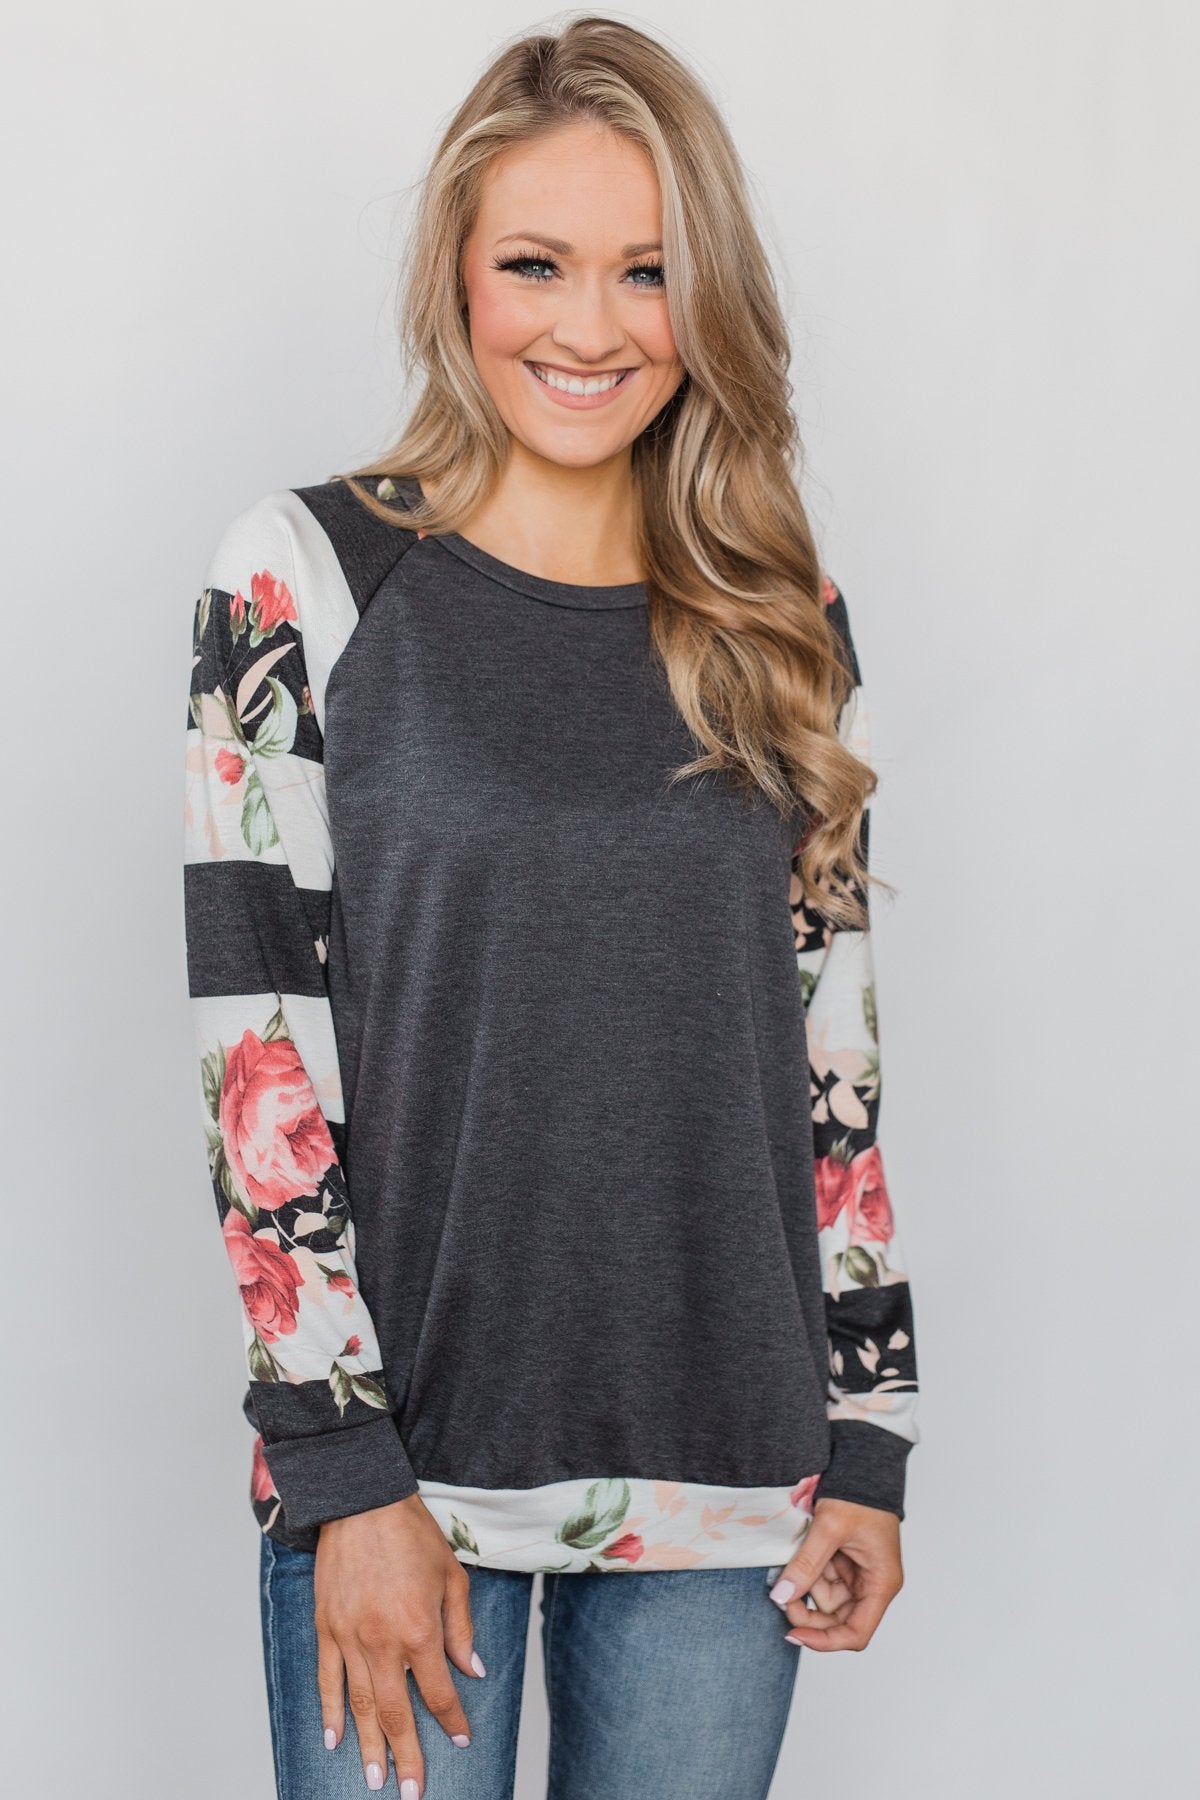 Can't Help Myself Long Sleeve Top- Charcoal